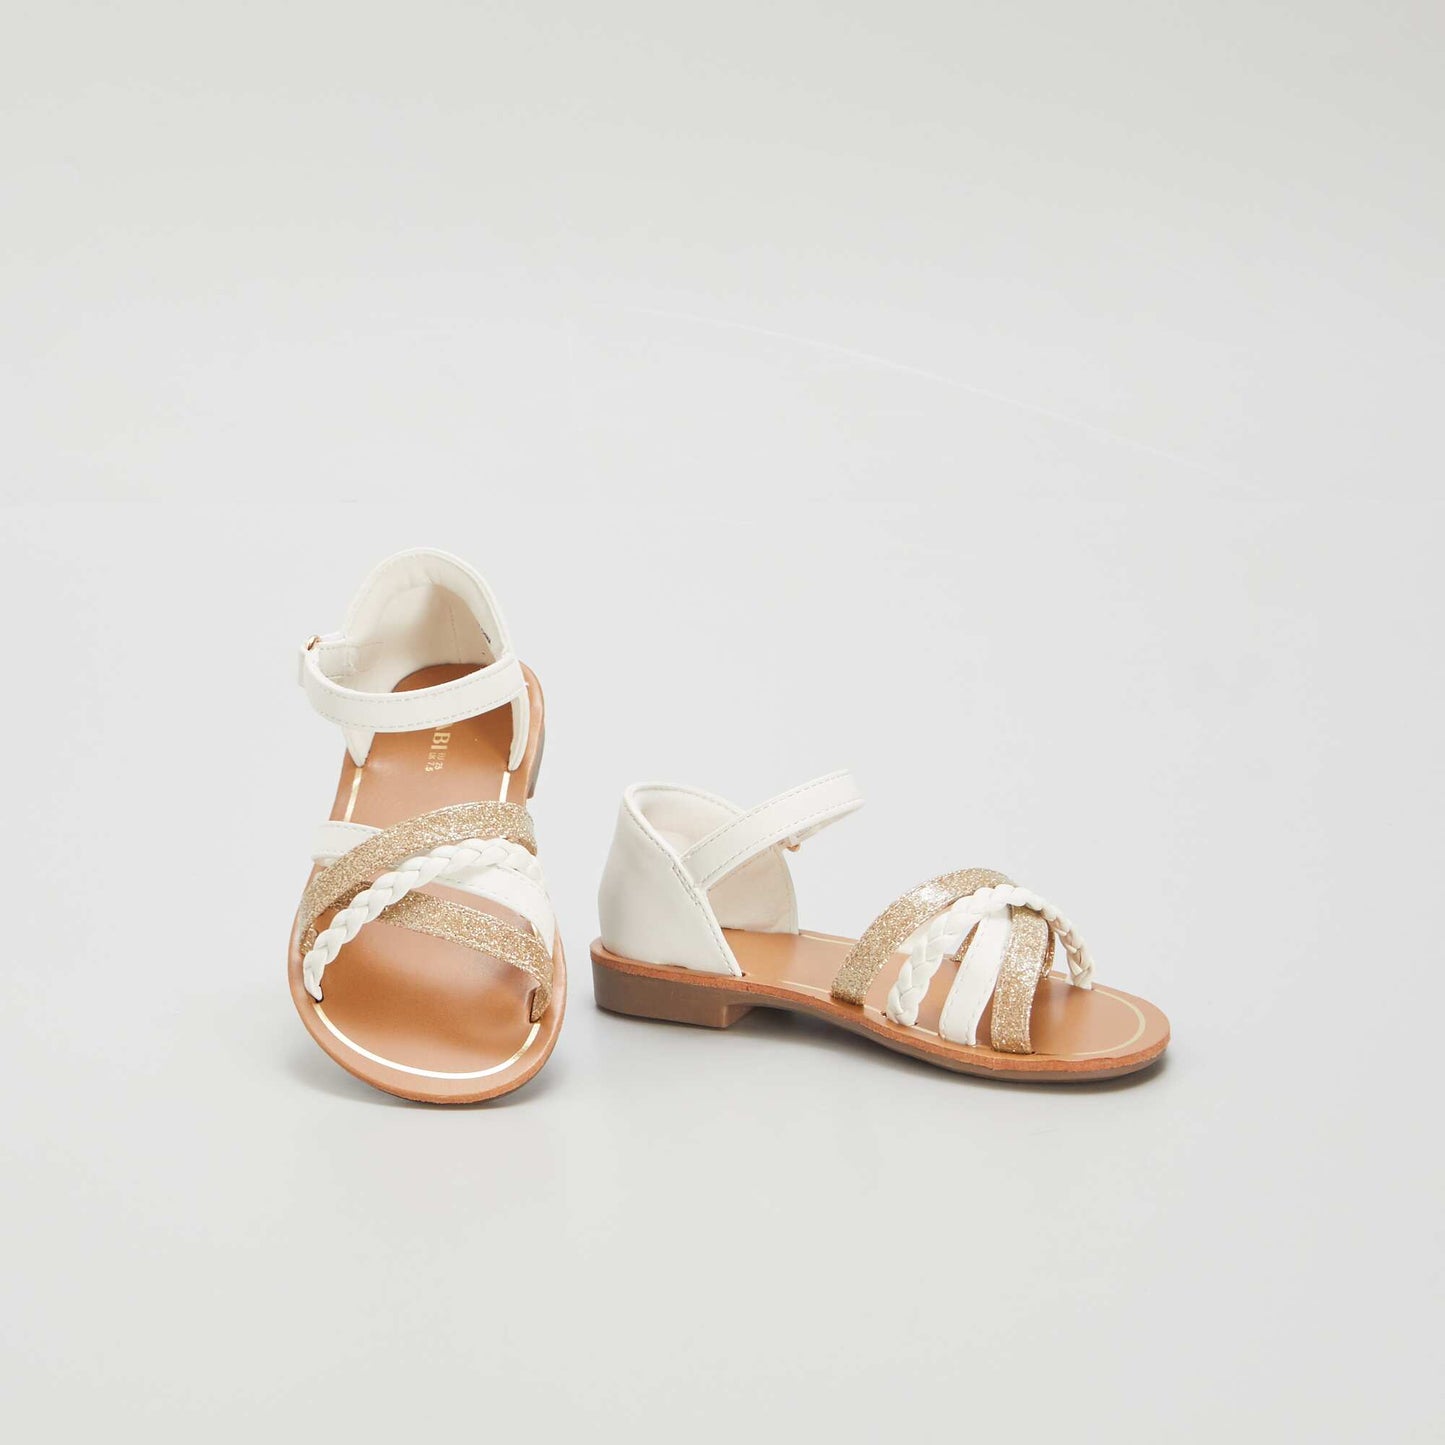 Sandals with stylish straps white